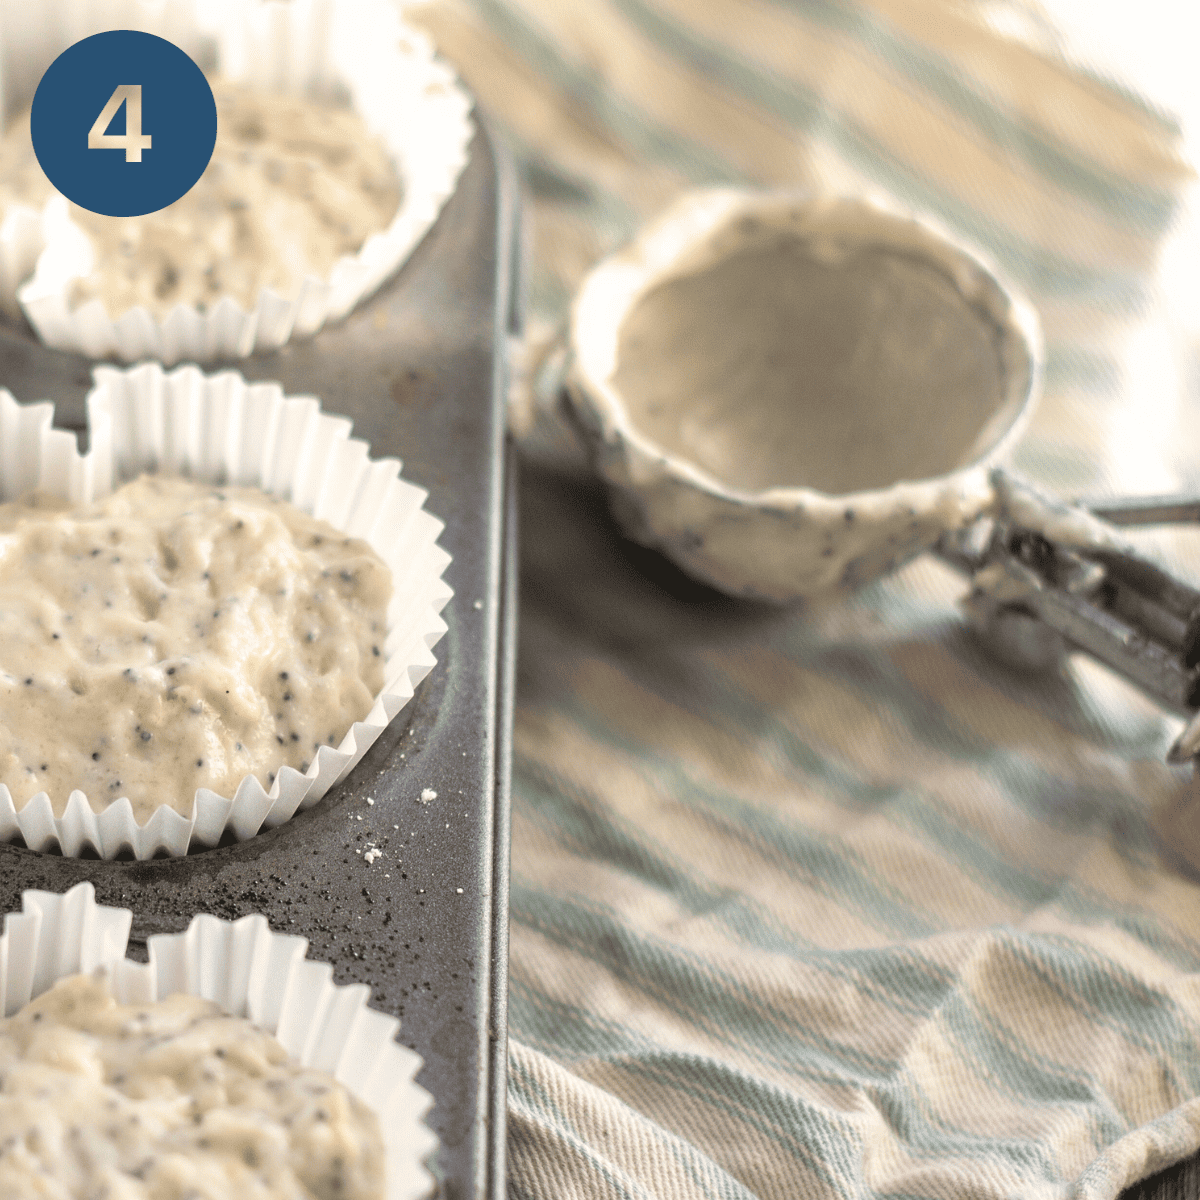 Putting lemon muffin batter into muffin cases.